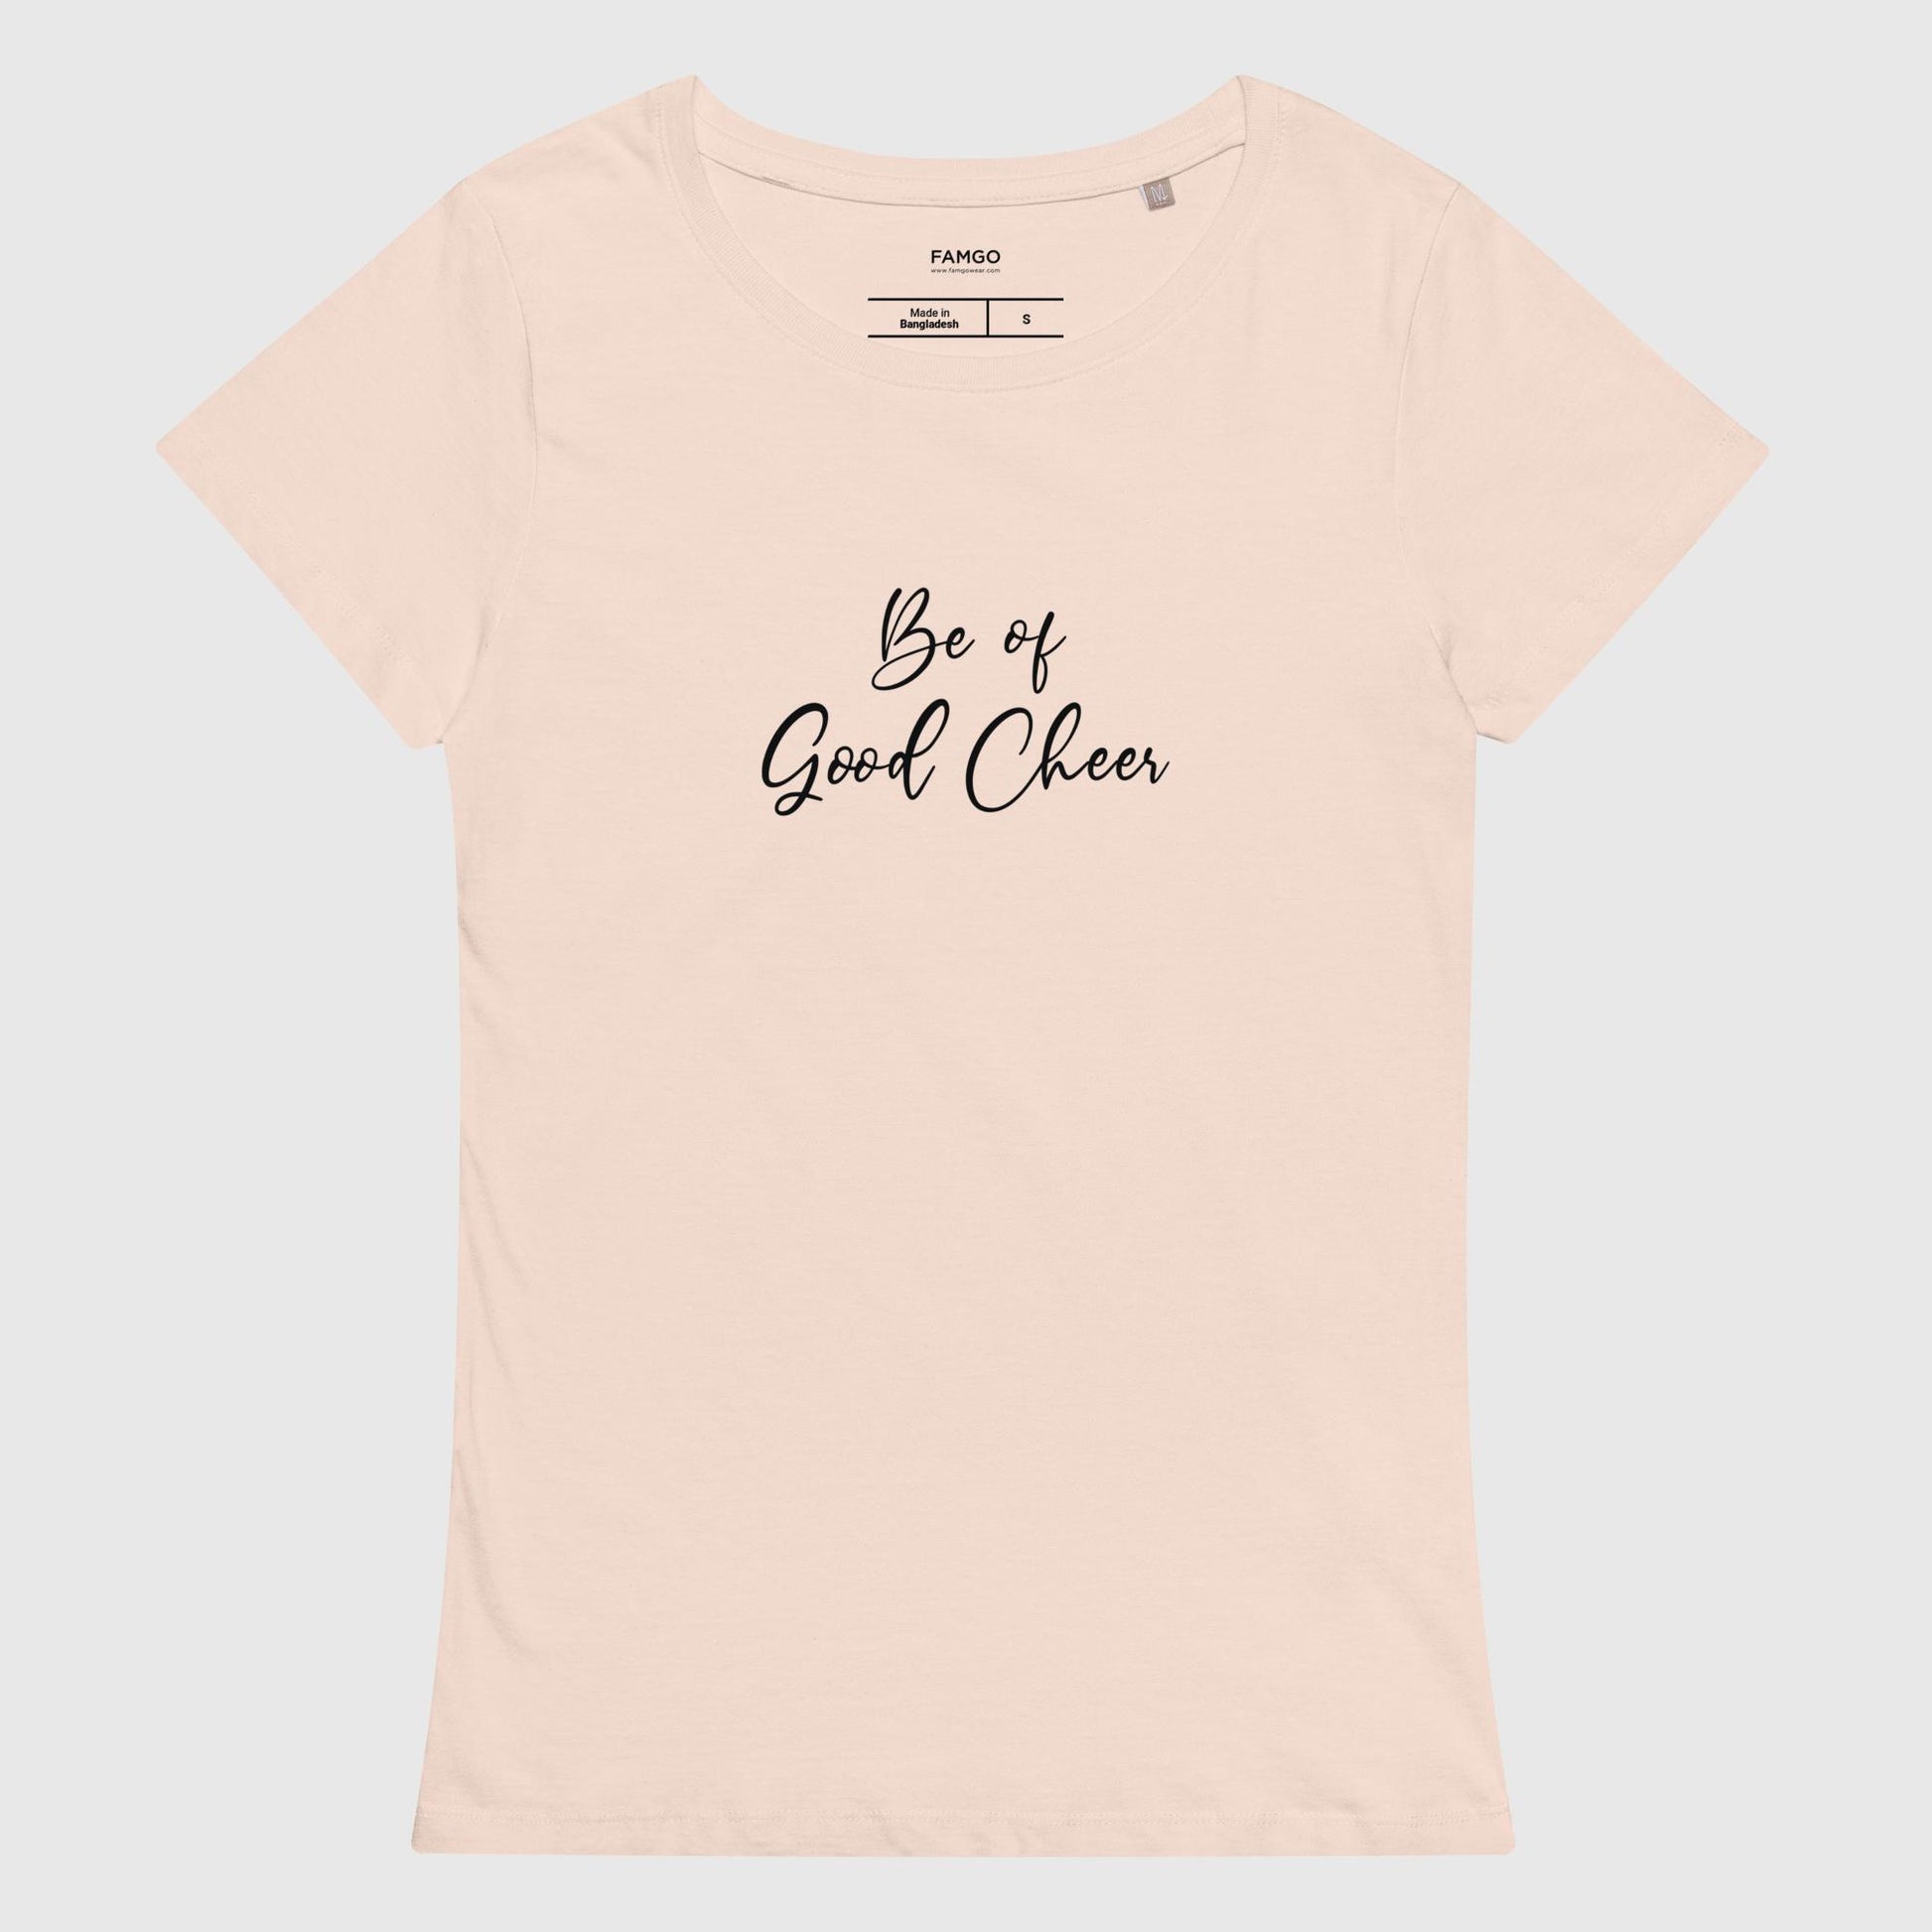 Women's creamy pink organic cotton t-shirt that features the positive quote, "Be of Good Cheer."